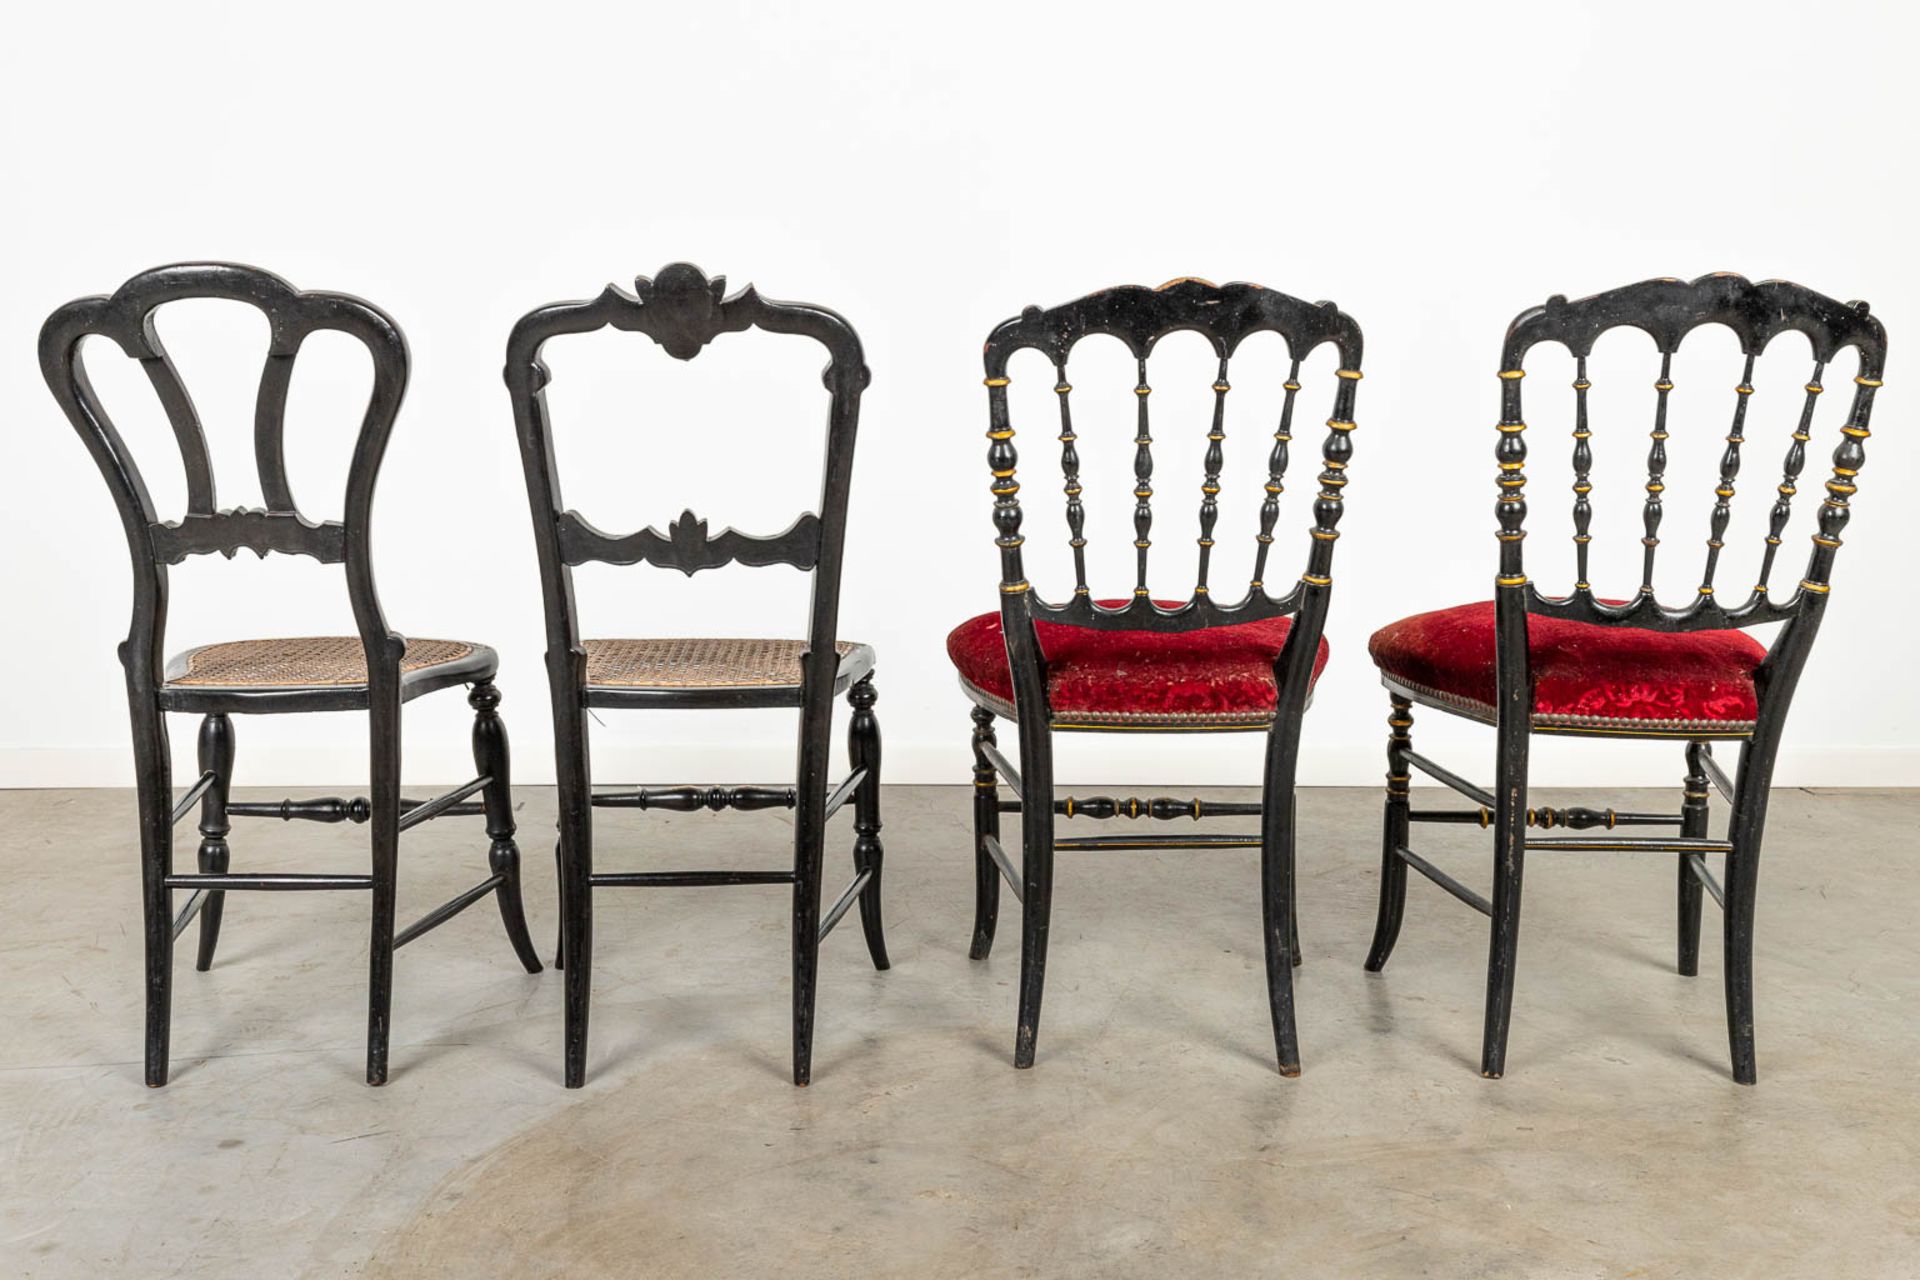 A collection of 3 chairs inlaid with mother of pearl and hand-painted decors. - Image 7 of 10